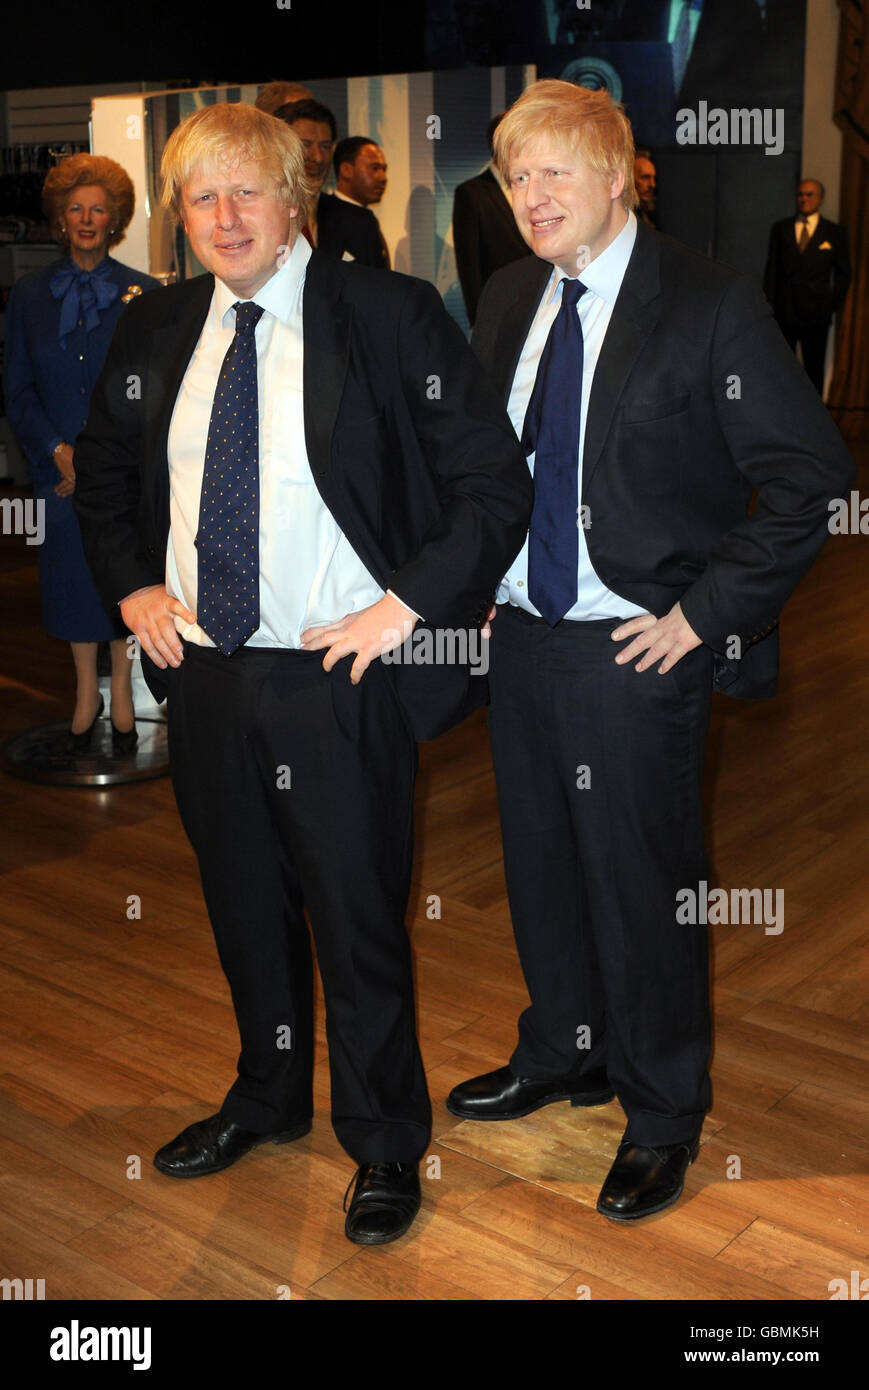 Mayor of London, Boris Johnson (left), meets his wax figure at Madame Tussauds in central London. Stock Photo